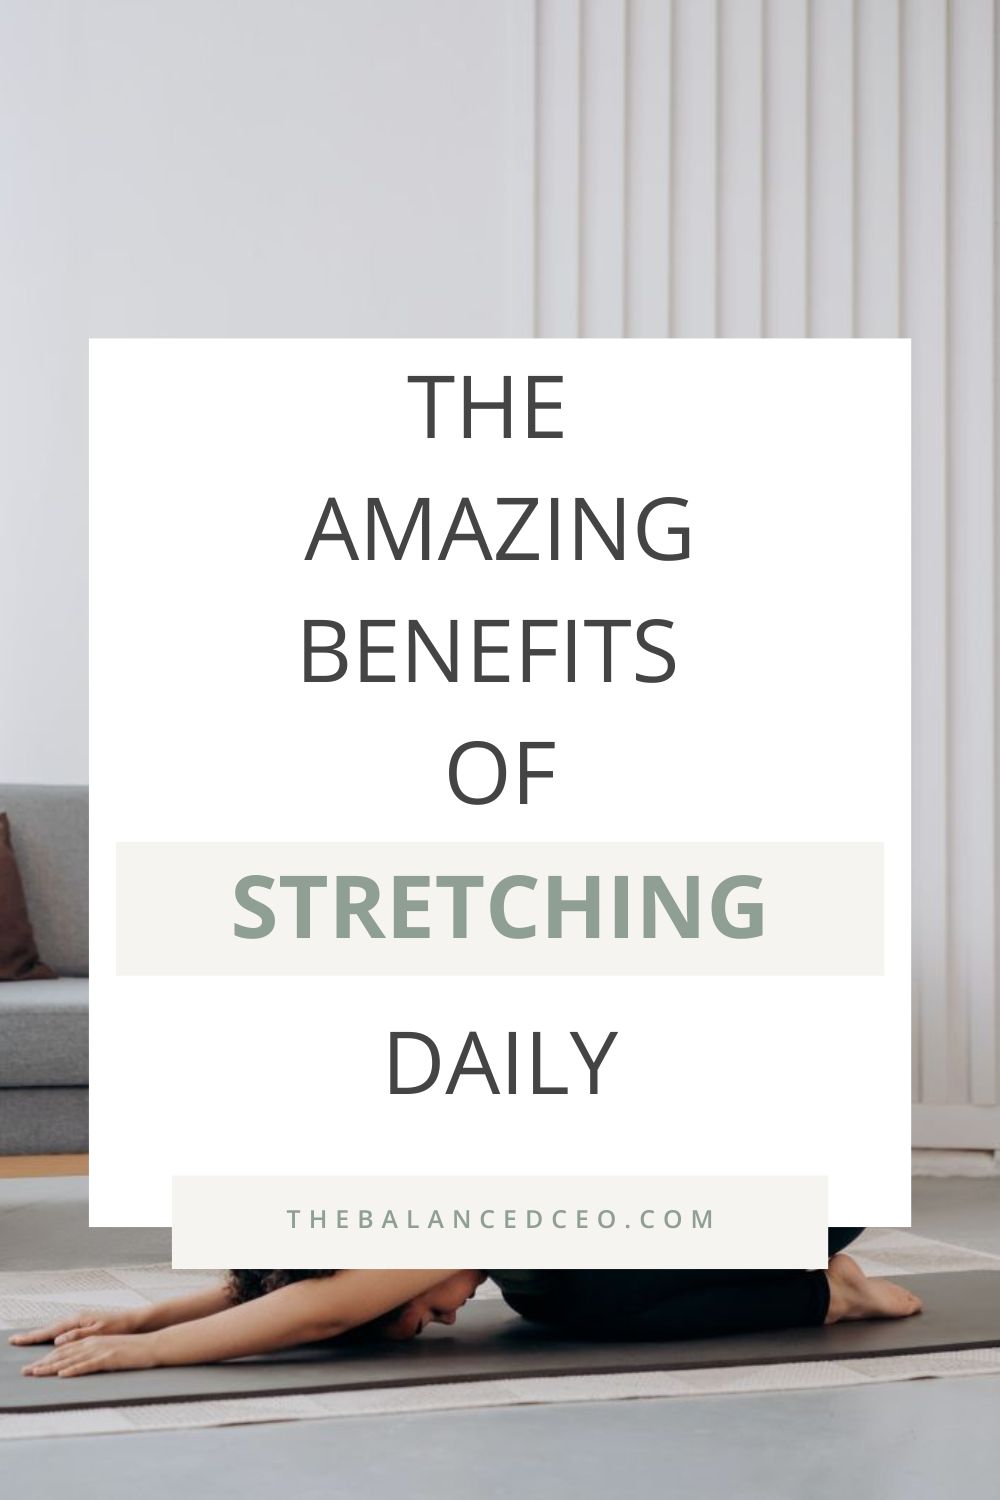 The Benefits of Stretching Daily